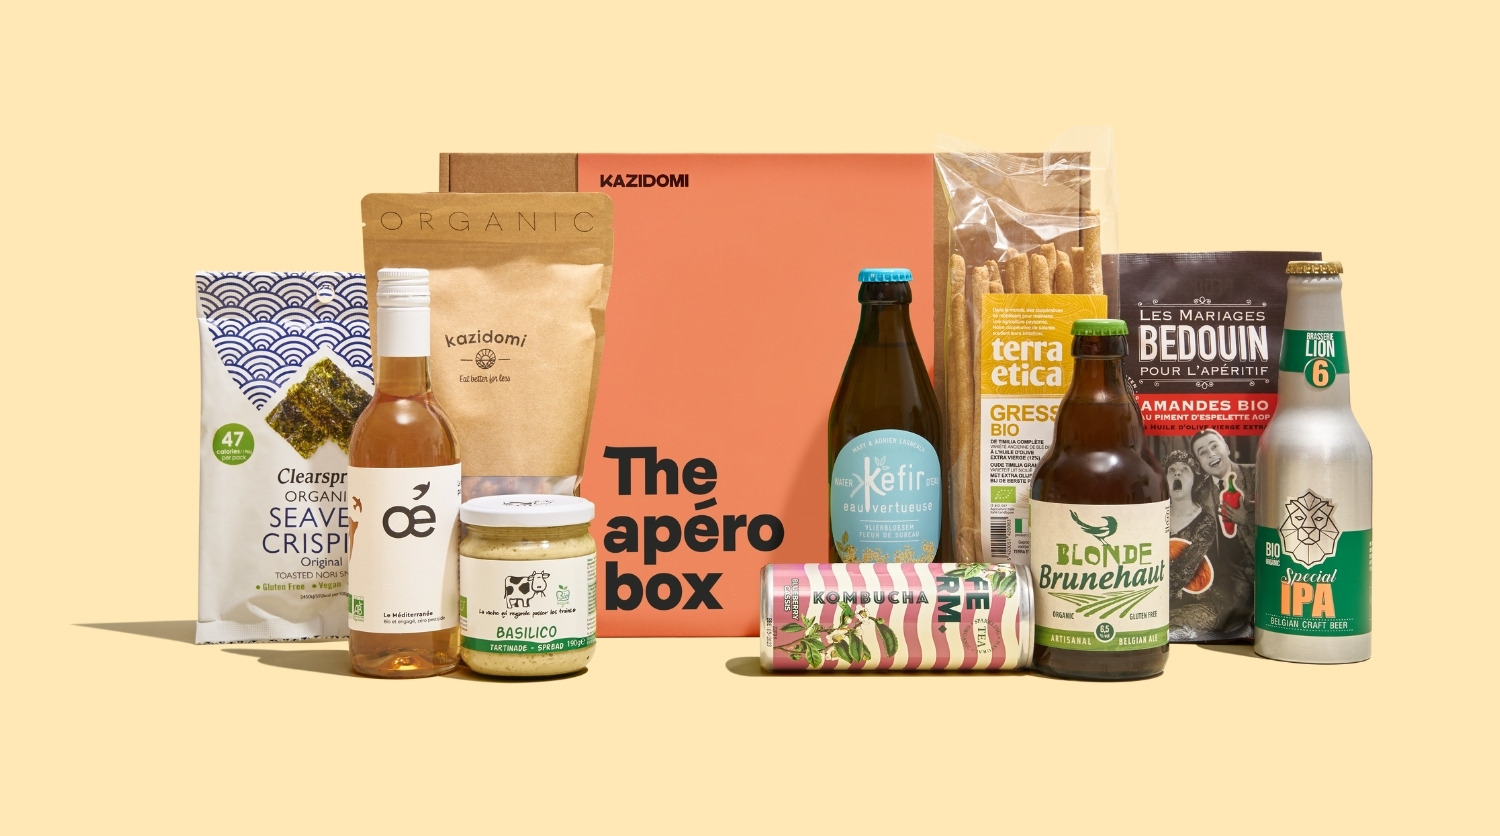 NEW ! The perfect apéro box for your summer nights with friends.